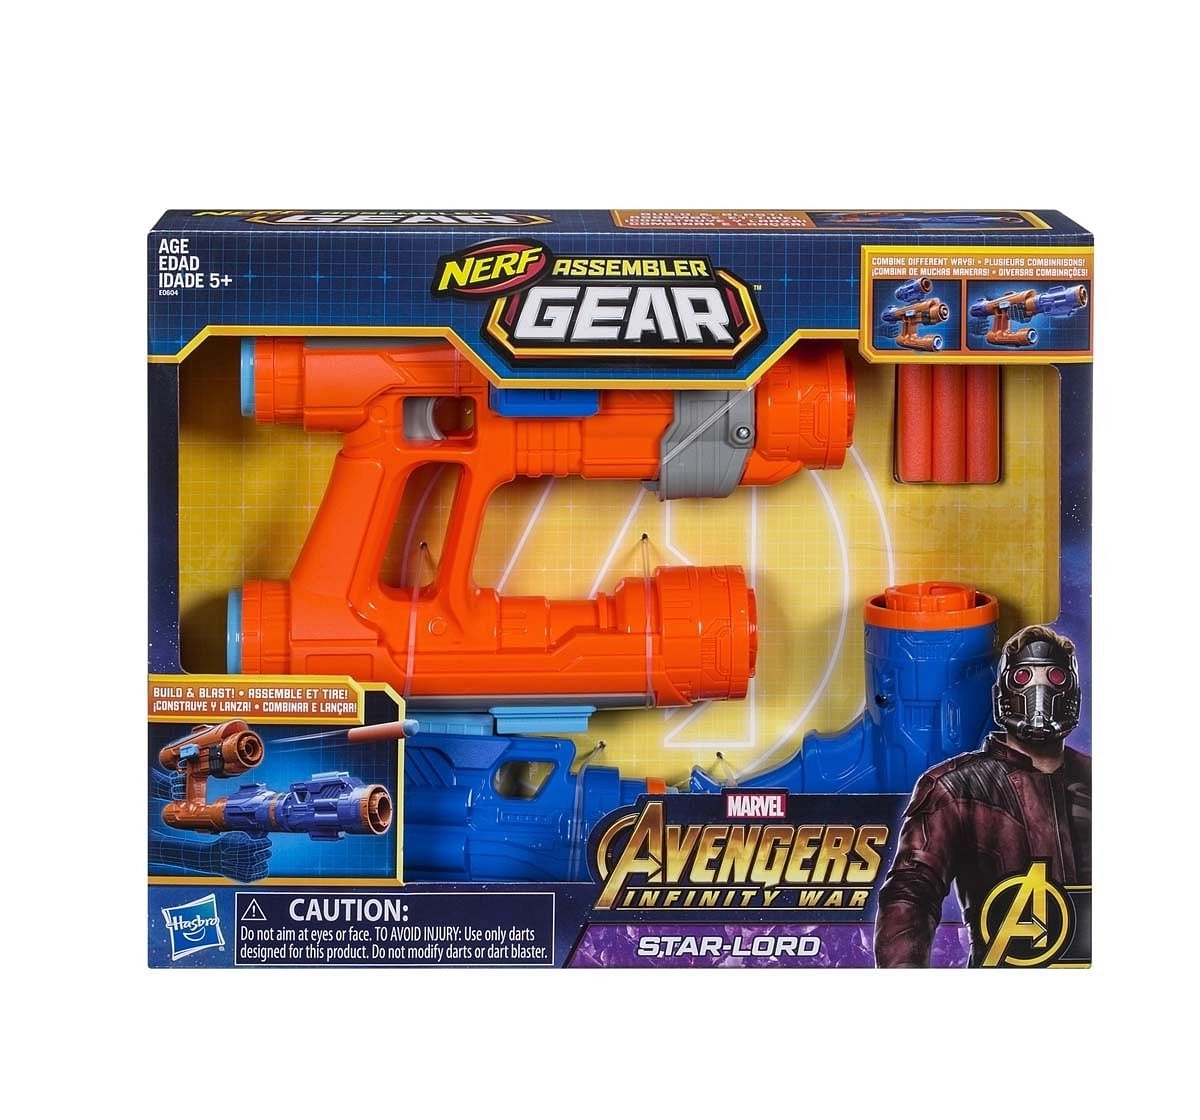 Marvel Avengers: Infinity War Nerf Star-Lord Assembler Gear Action Figure Play Sets for Kids age 5Y+ 